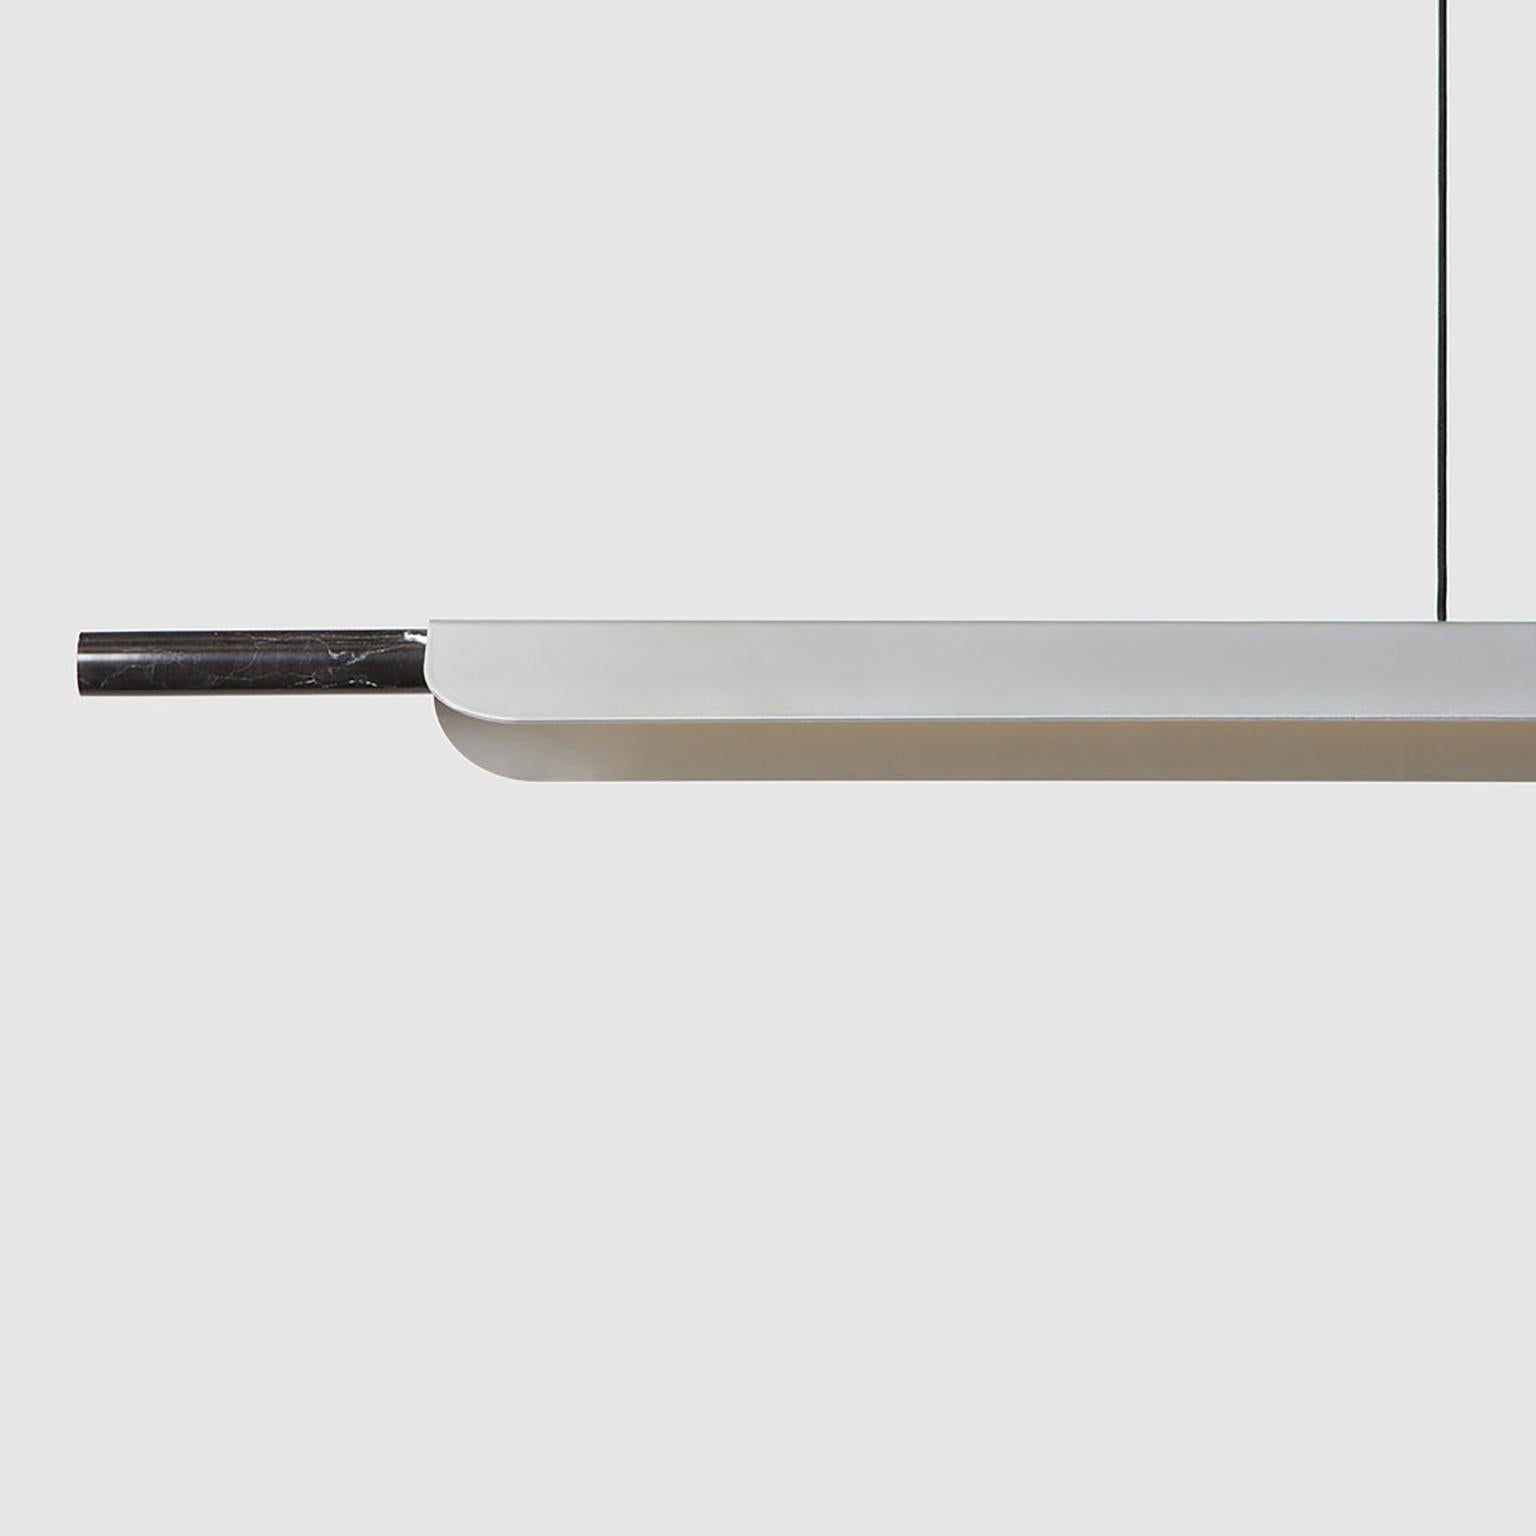 Formation Linear pendant is a sleek, luxurious aluminum and marble fixture ideally suited to hang above Kitchen islands, dining tables, works spaces and other environments that require functional yet eye-catching lighting.
The core design is a set